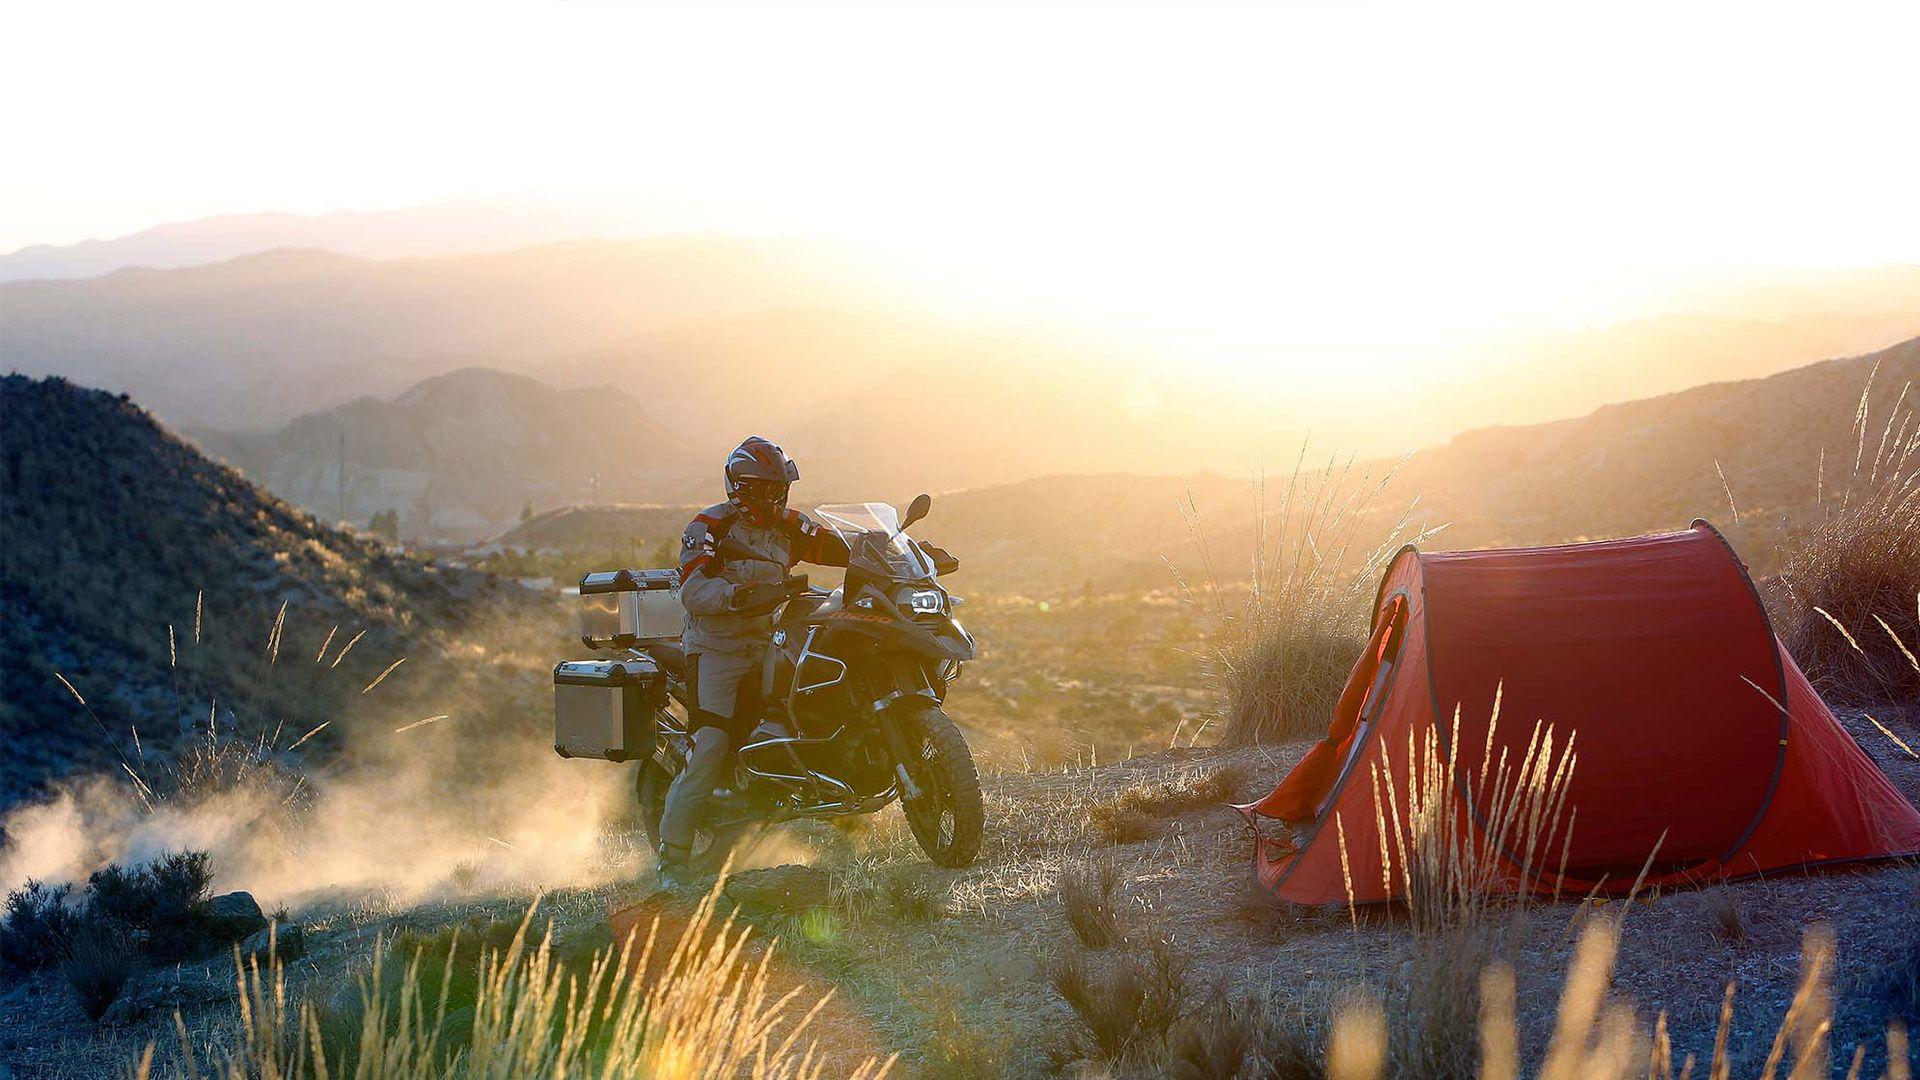 BMW R1200GS Adventure Review and Wallpaper